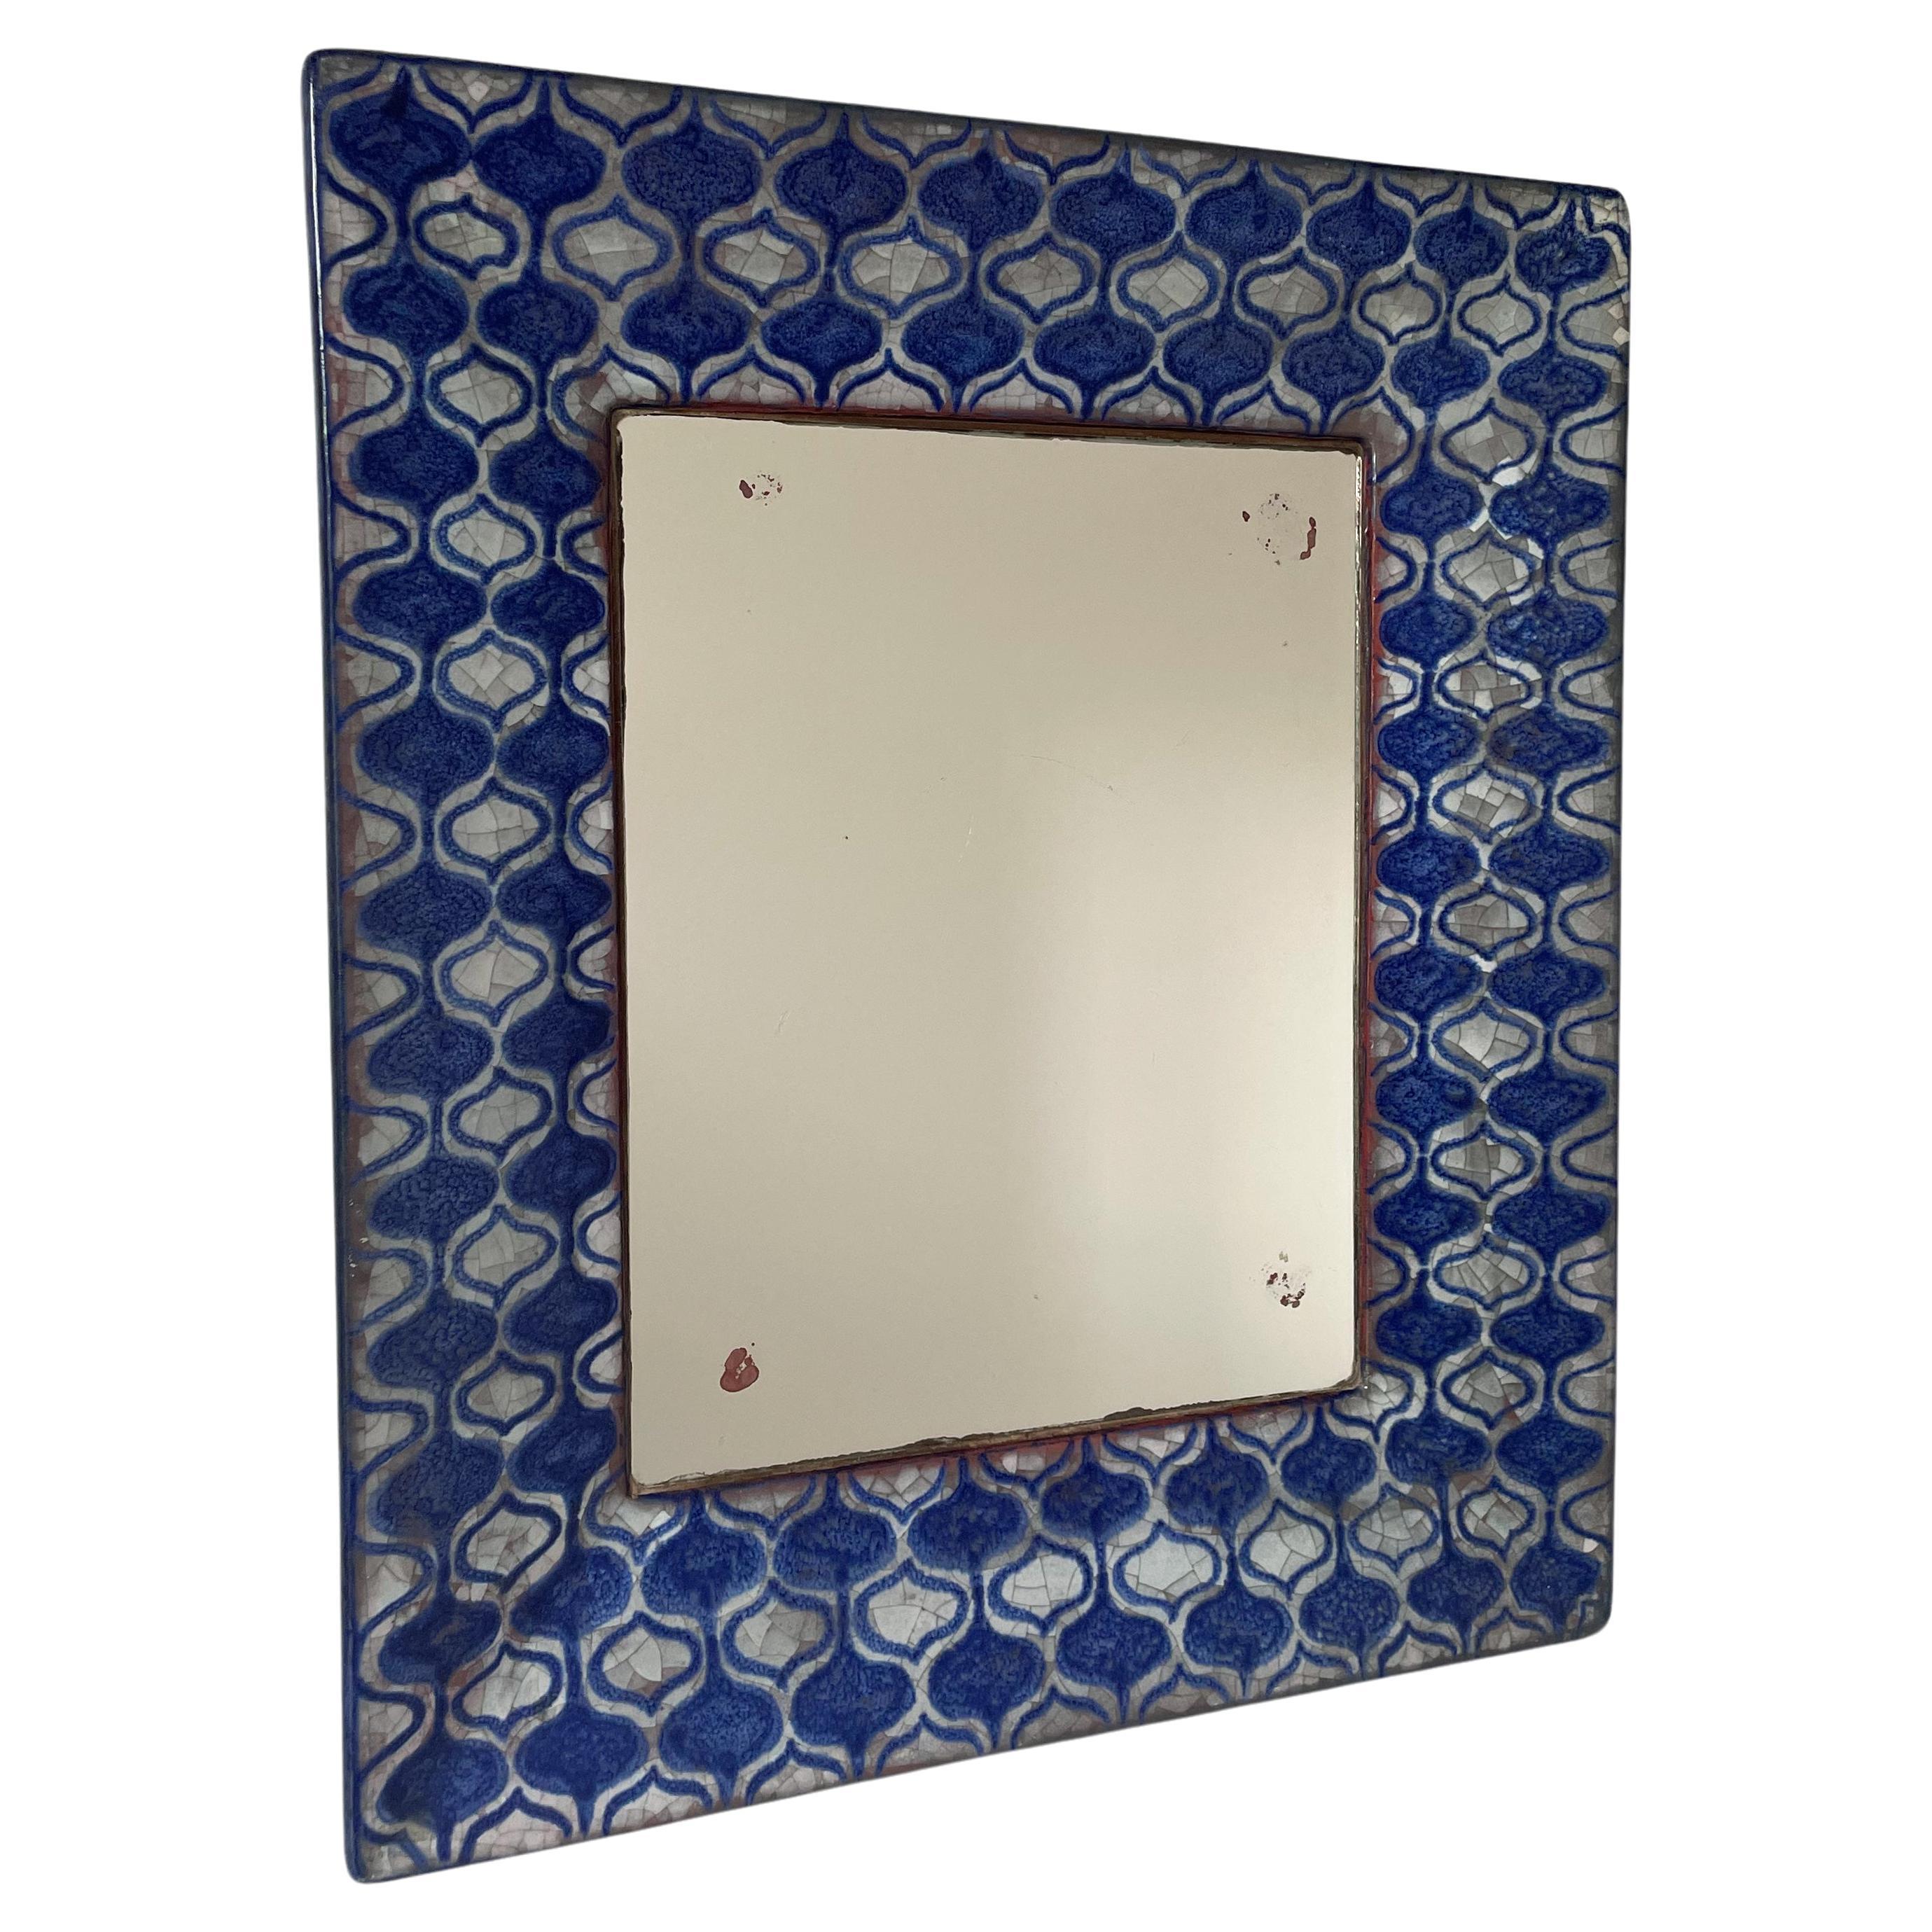 Danish ceramic wall mirror decorated by hand and designed by Marianne Starck for Michael Andersen & Son in the 1960s. Solid, thick ceramic frame with navy blue and light grey persia crackle glaze hand painted in a graphic, stylized pattern with soft